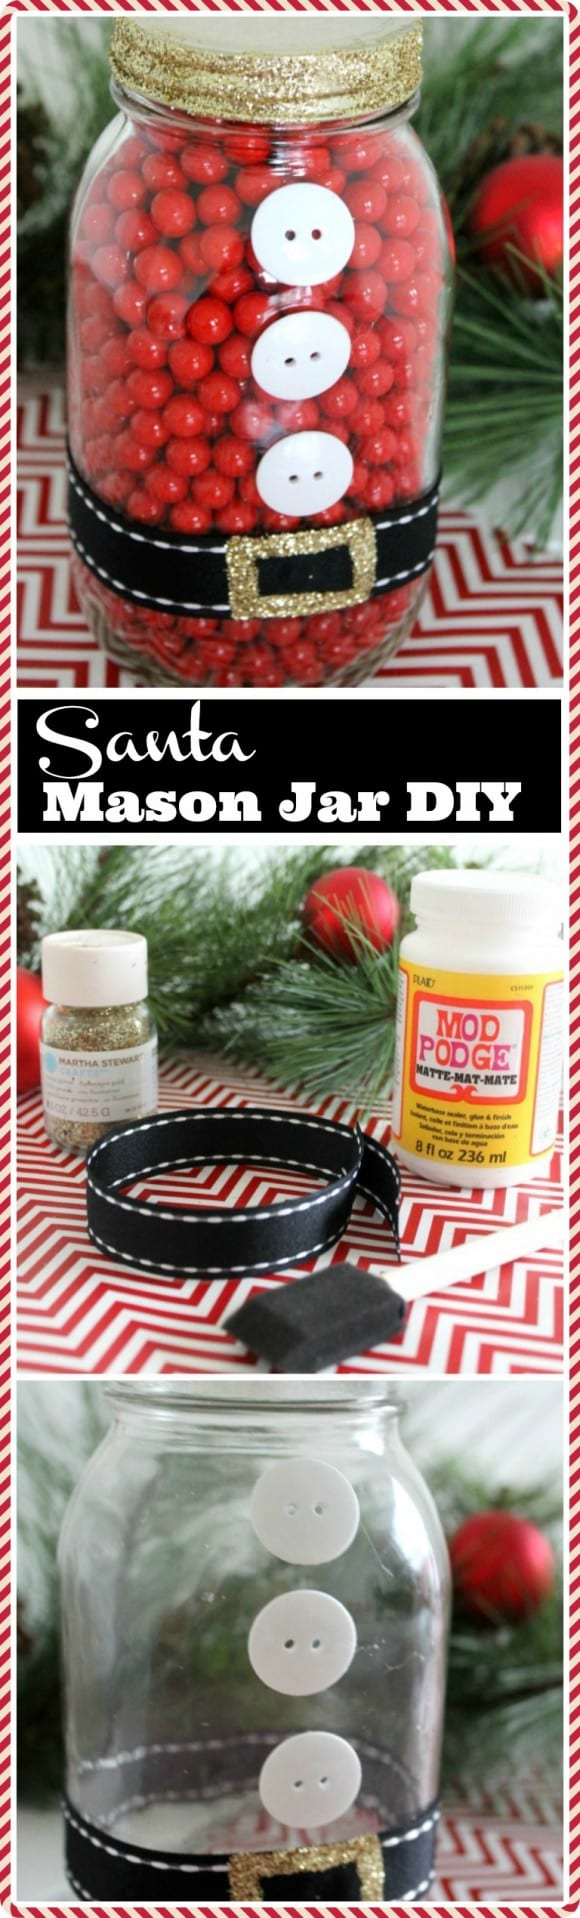 Check out this easy Santa mason jar DIY, perfect for last minute gifts! CatchMyParty.com